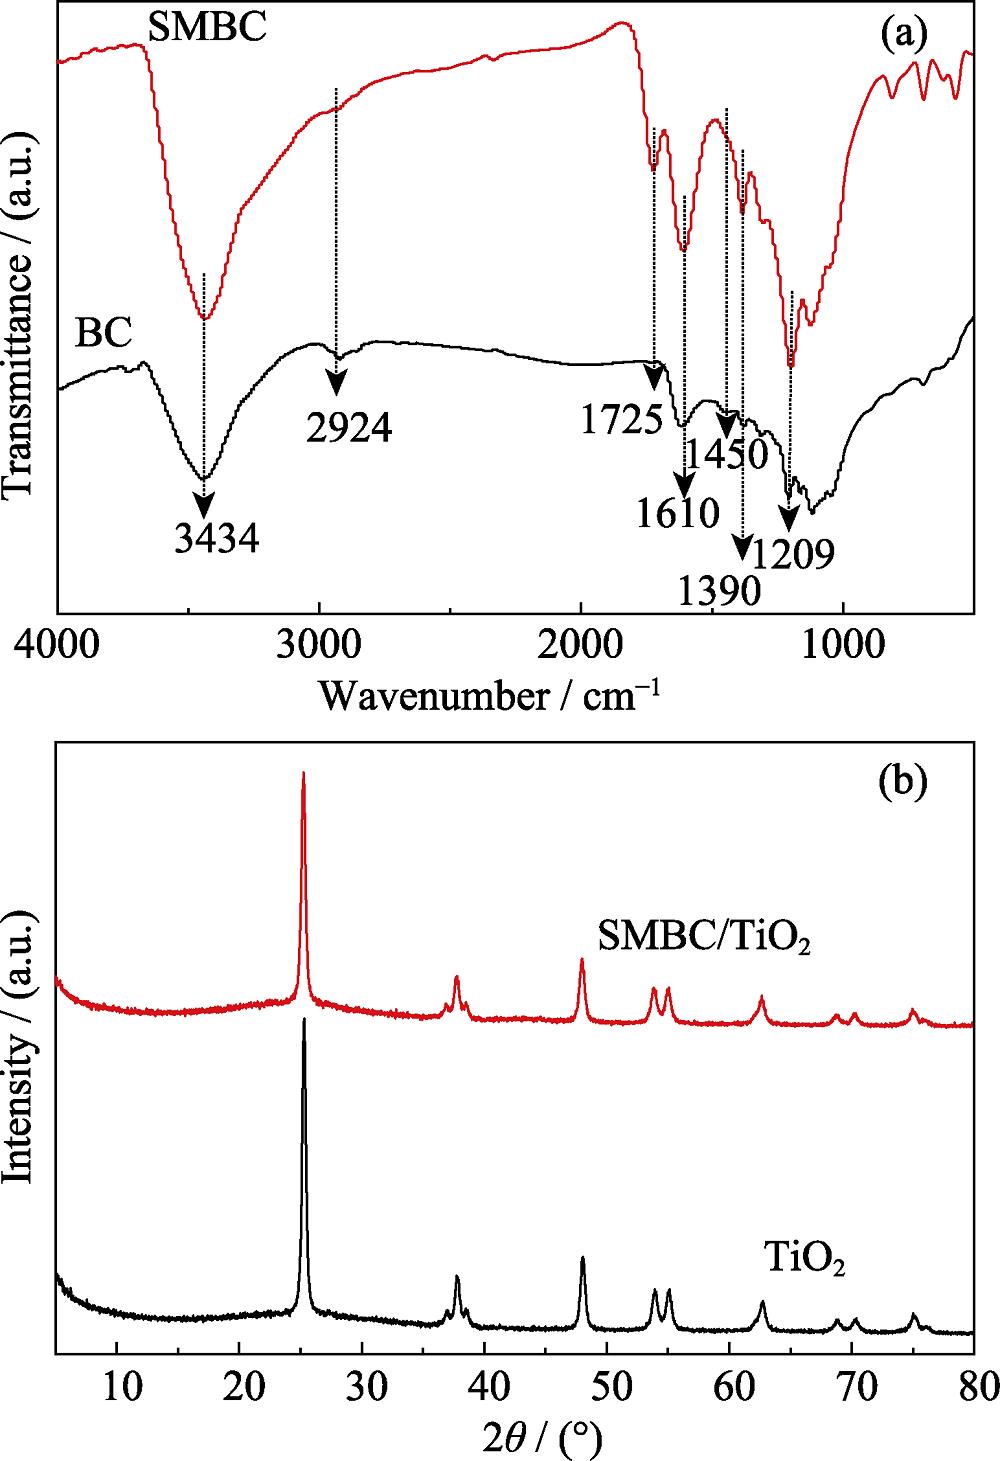 (a) FT-IR spectra of BC and SMBC, (b) XRD patterns of pure TiO2 and SMBC/ TiO2 nanocomposites